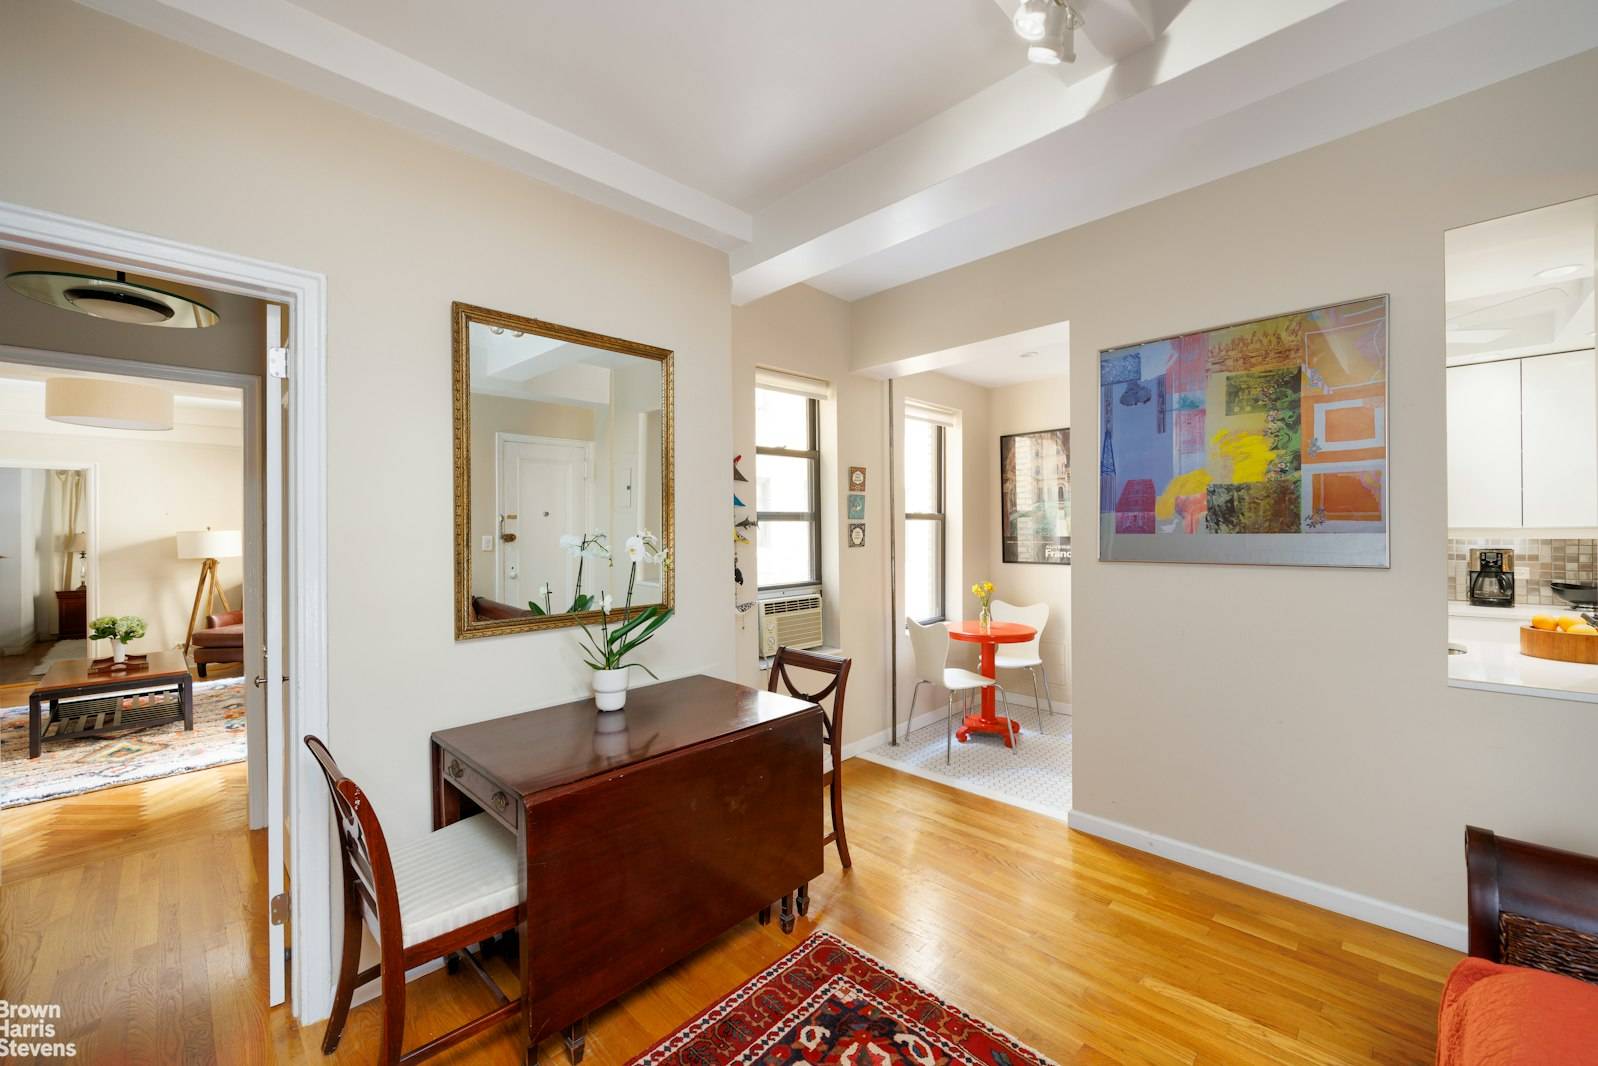 Located in the rear of the building, this pin drop quiet pre war home is a sanctuary from the hustle and bustle of Manhattan.